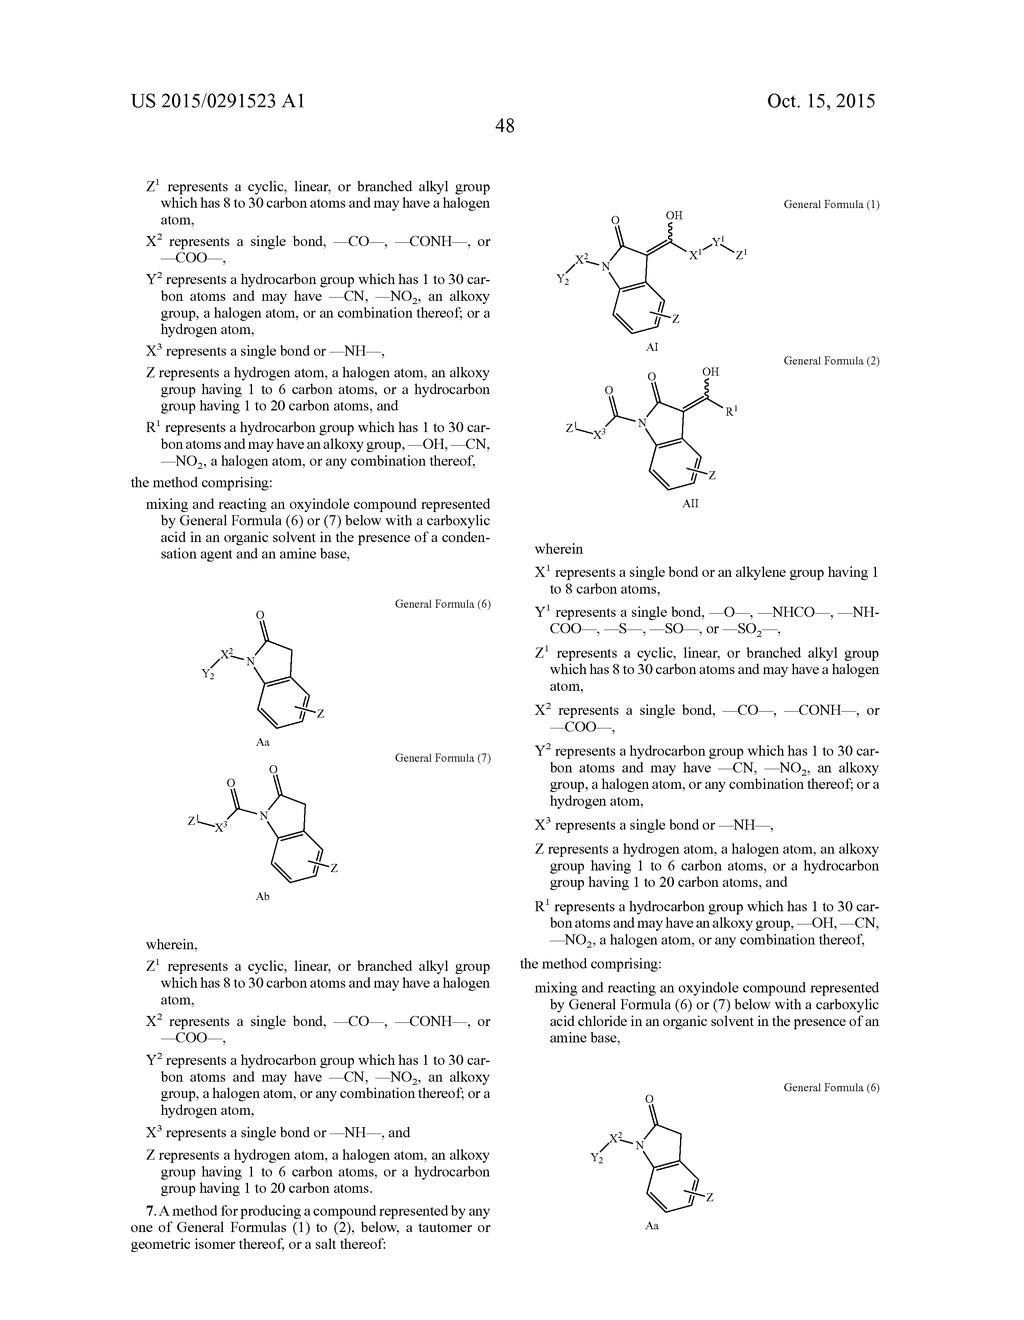 COMPOUND; TAUTOMER AND GEOMETRIC ISOMER THEREOF; SALT OF SAID COMPOUND,     TAUTOMER, OR GEOMETRIC ISOMER; METHOD FOR MANUFACTURING SAID COMPOUND,     TAUTOMER, ISOMER, OR SALT; ANTIMICROBIAL AGENT; AND ANTI-INFECTIVE DRUG - diagram, schematic, and image 49